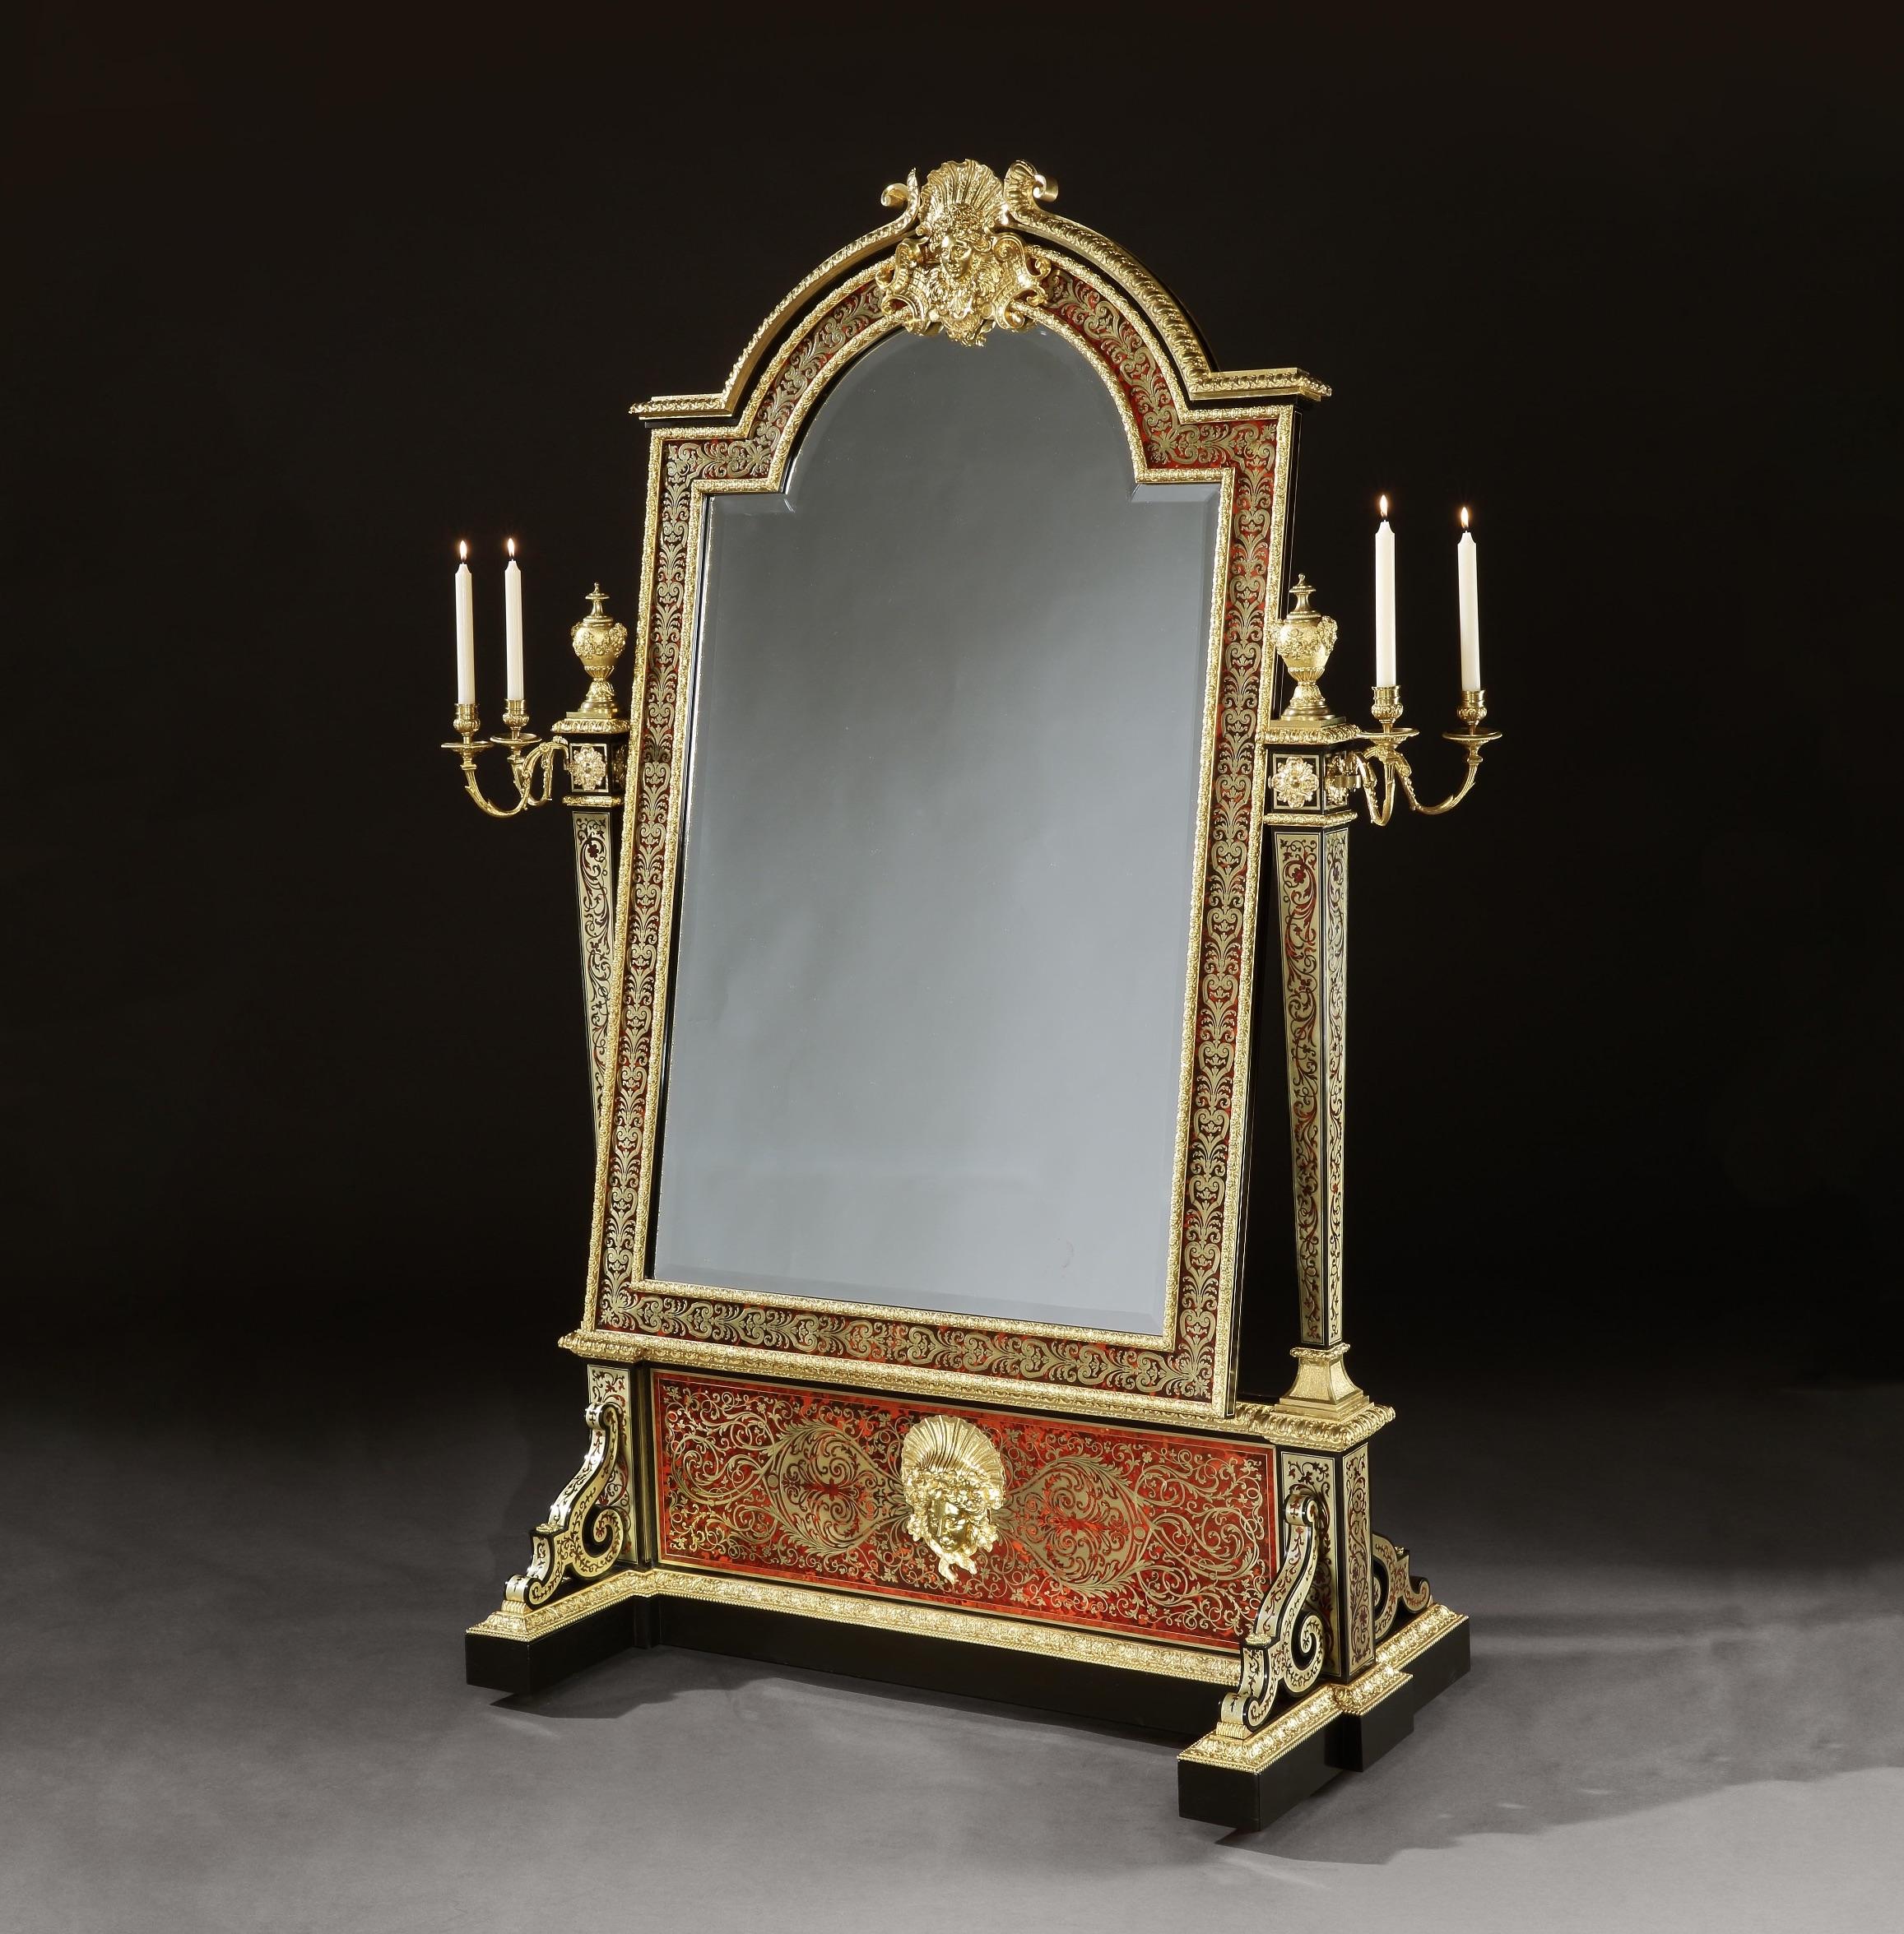 An extraordinary Boulle Marquetry inlaid cheval mirror
in the Louis XIV Manner

Constructed from bois noirci and dressed with fire gilded bronze mounts throughout, the surfaces decorated and adorned with tortoise shell and brass marquetry in the